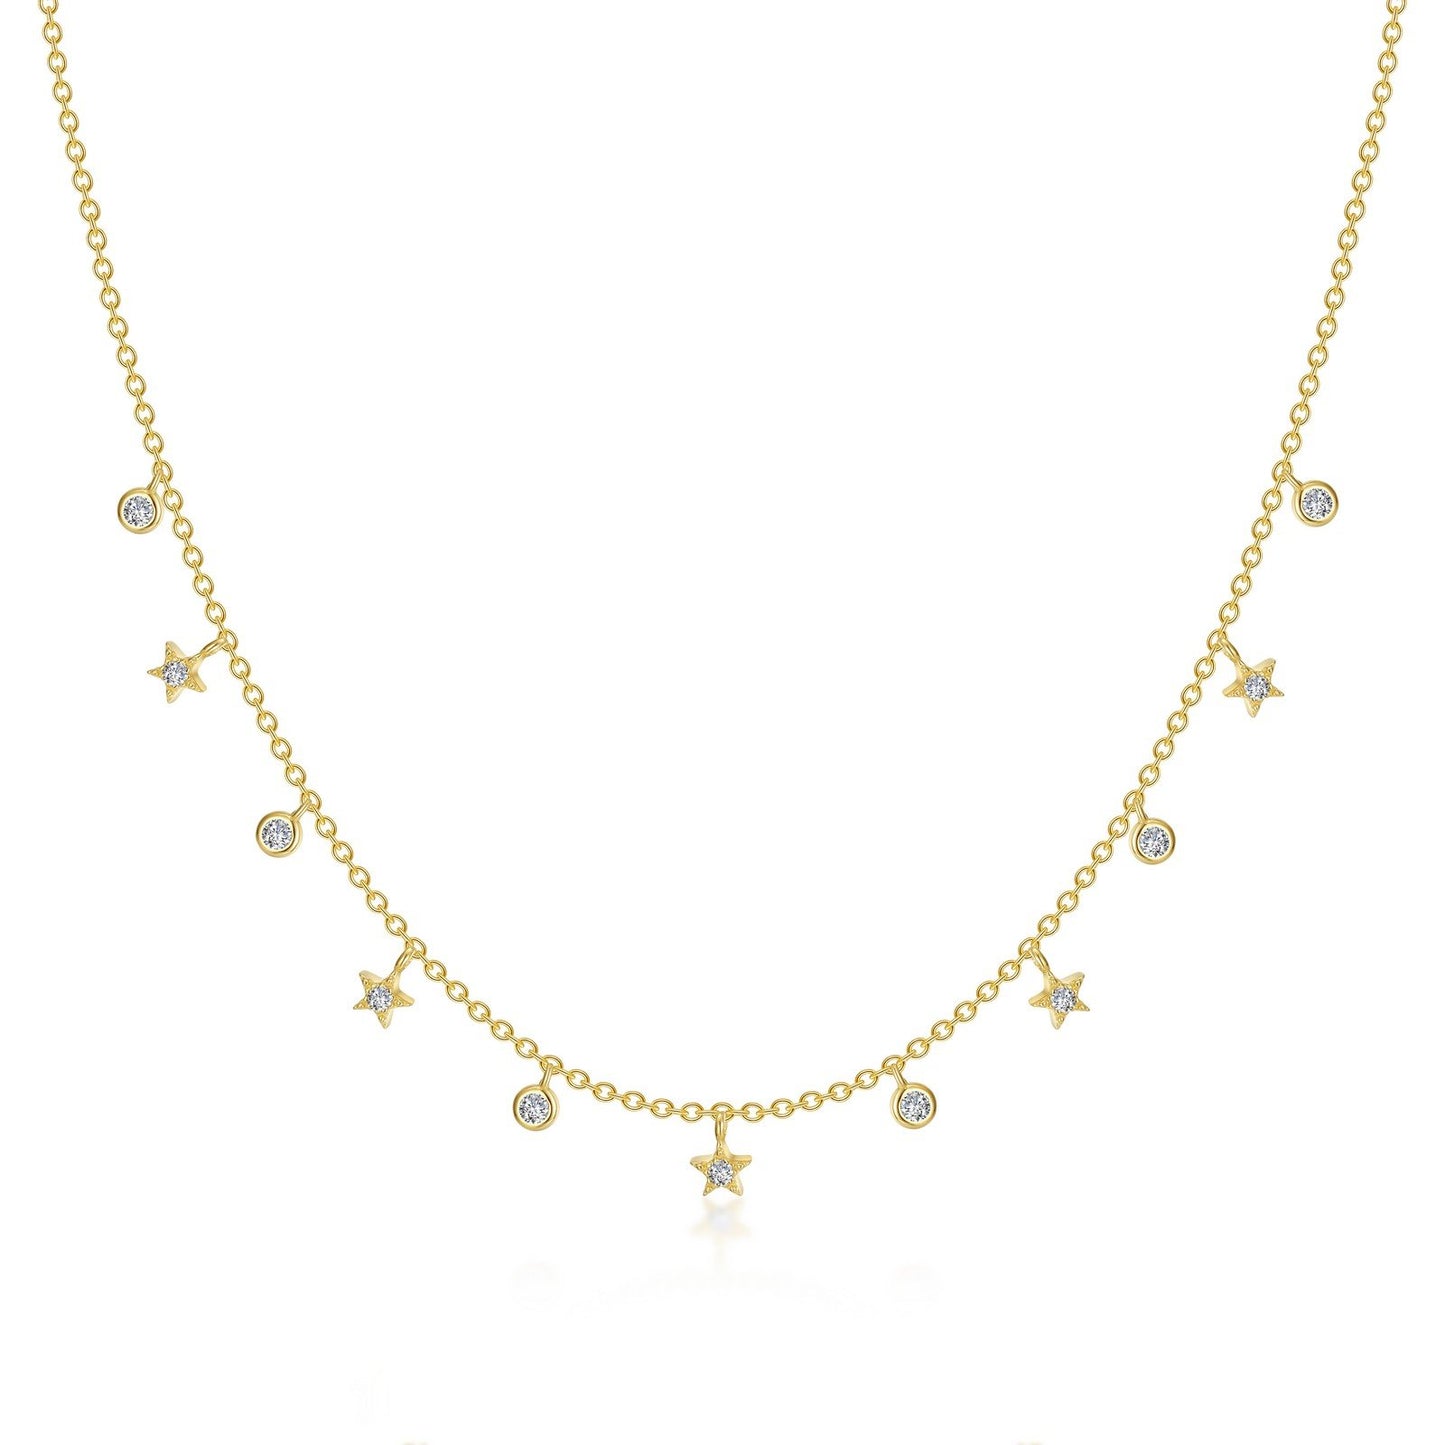 LaFonn Gold Simulated Diamond N/A NECKLACES Starfall Necklace